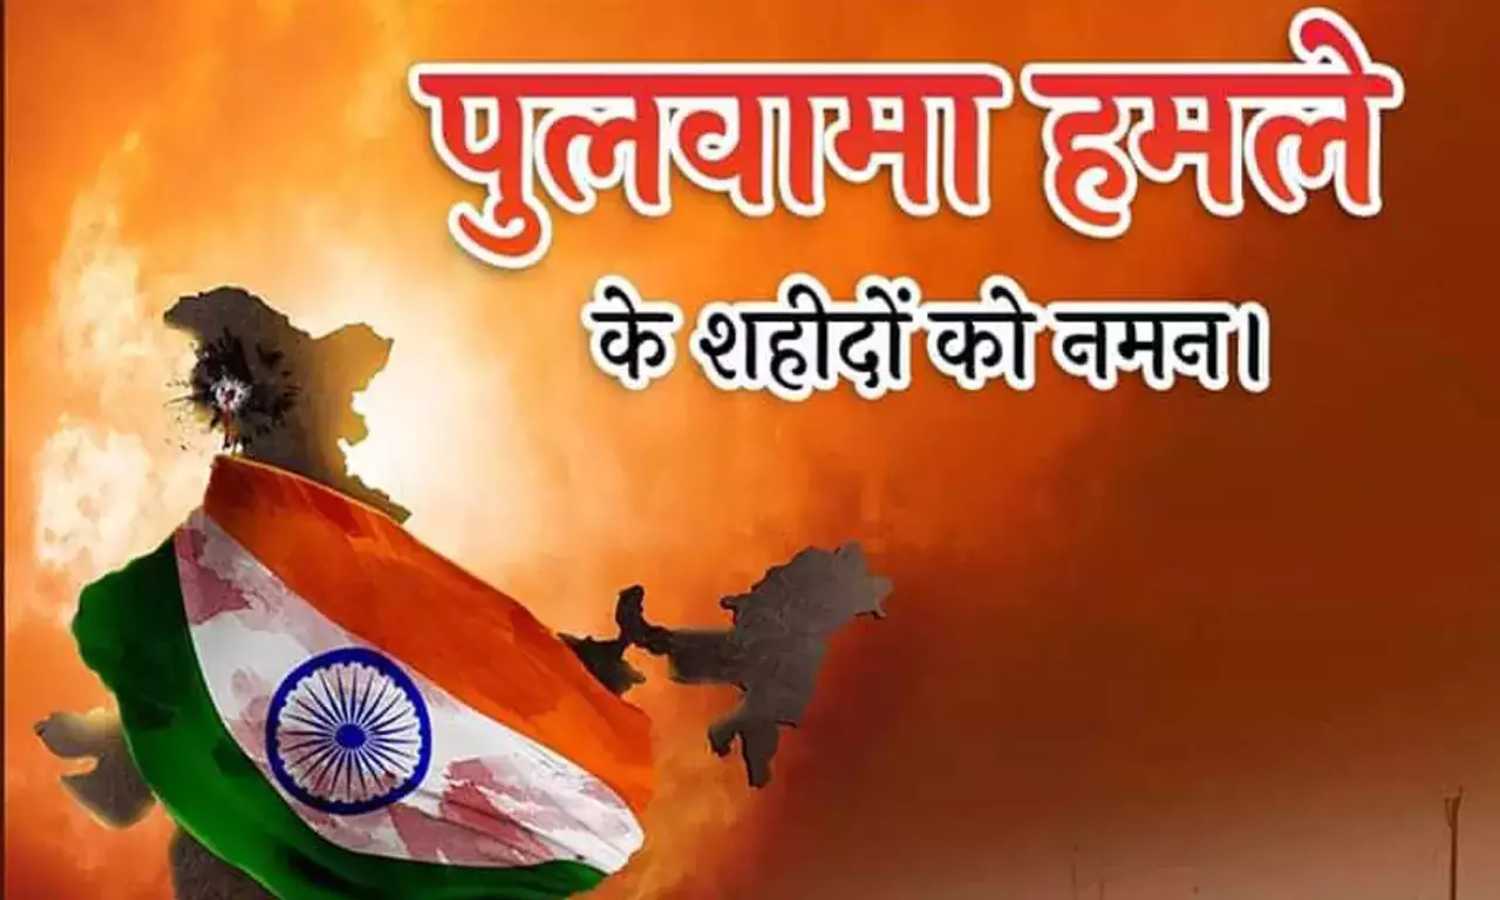 Pulwama Attack Quotes in Hindi